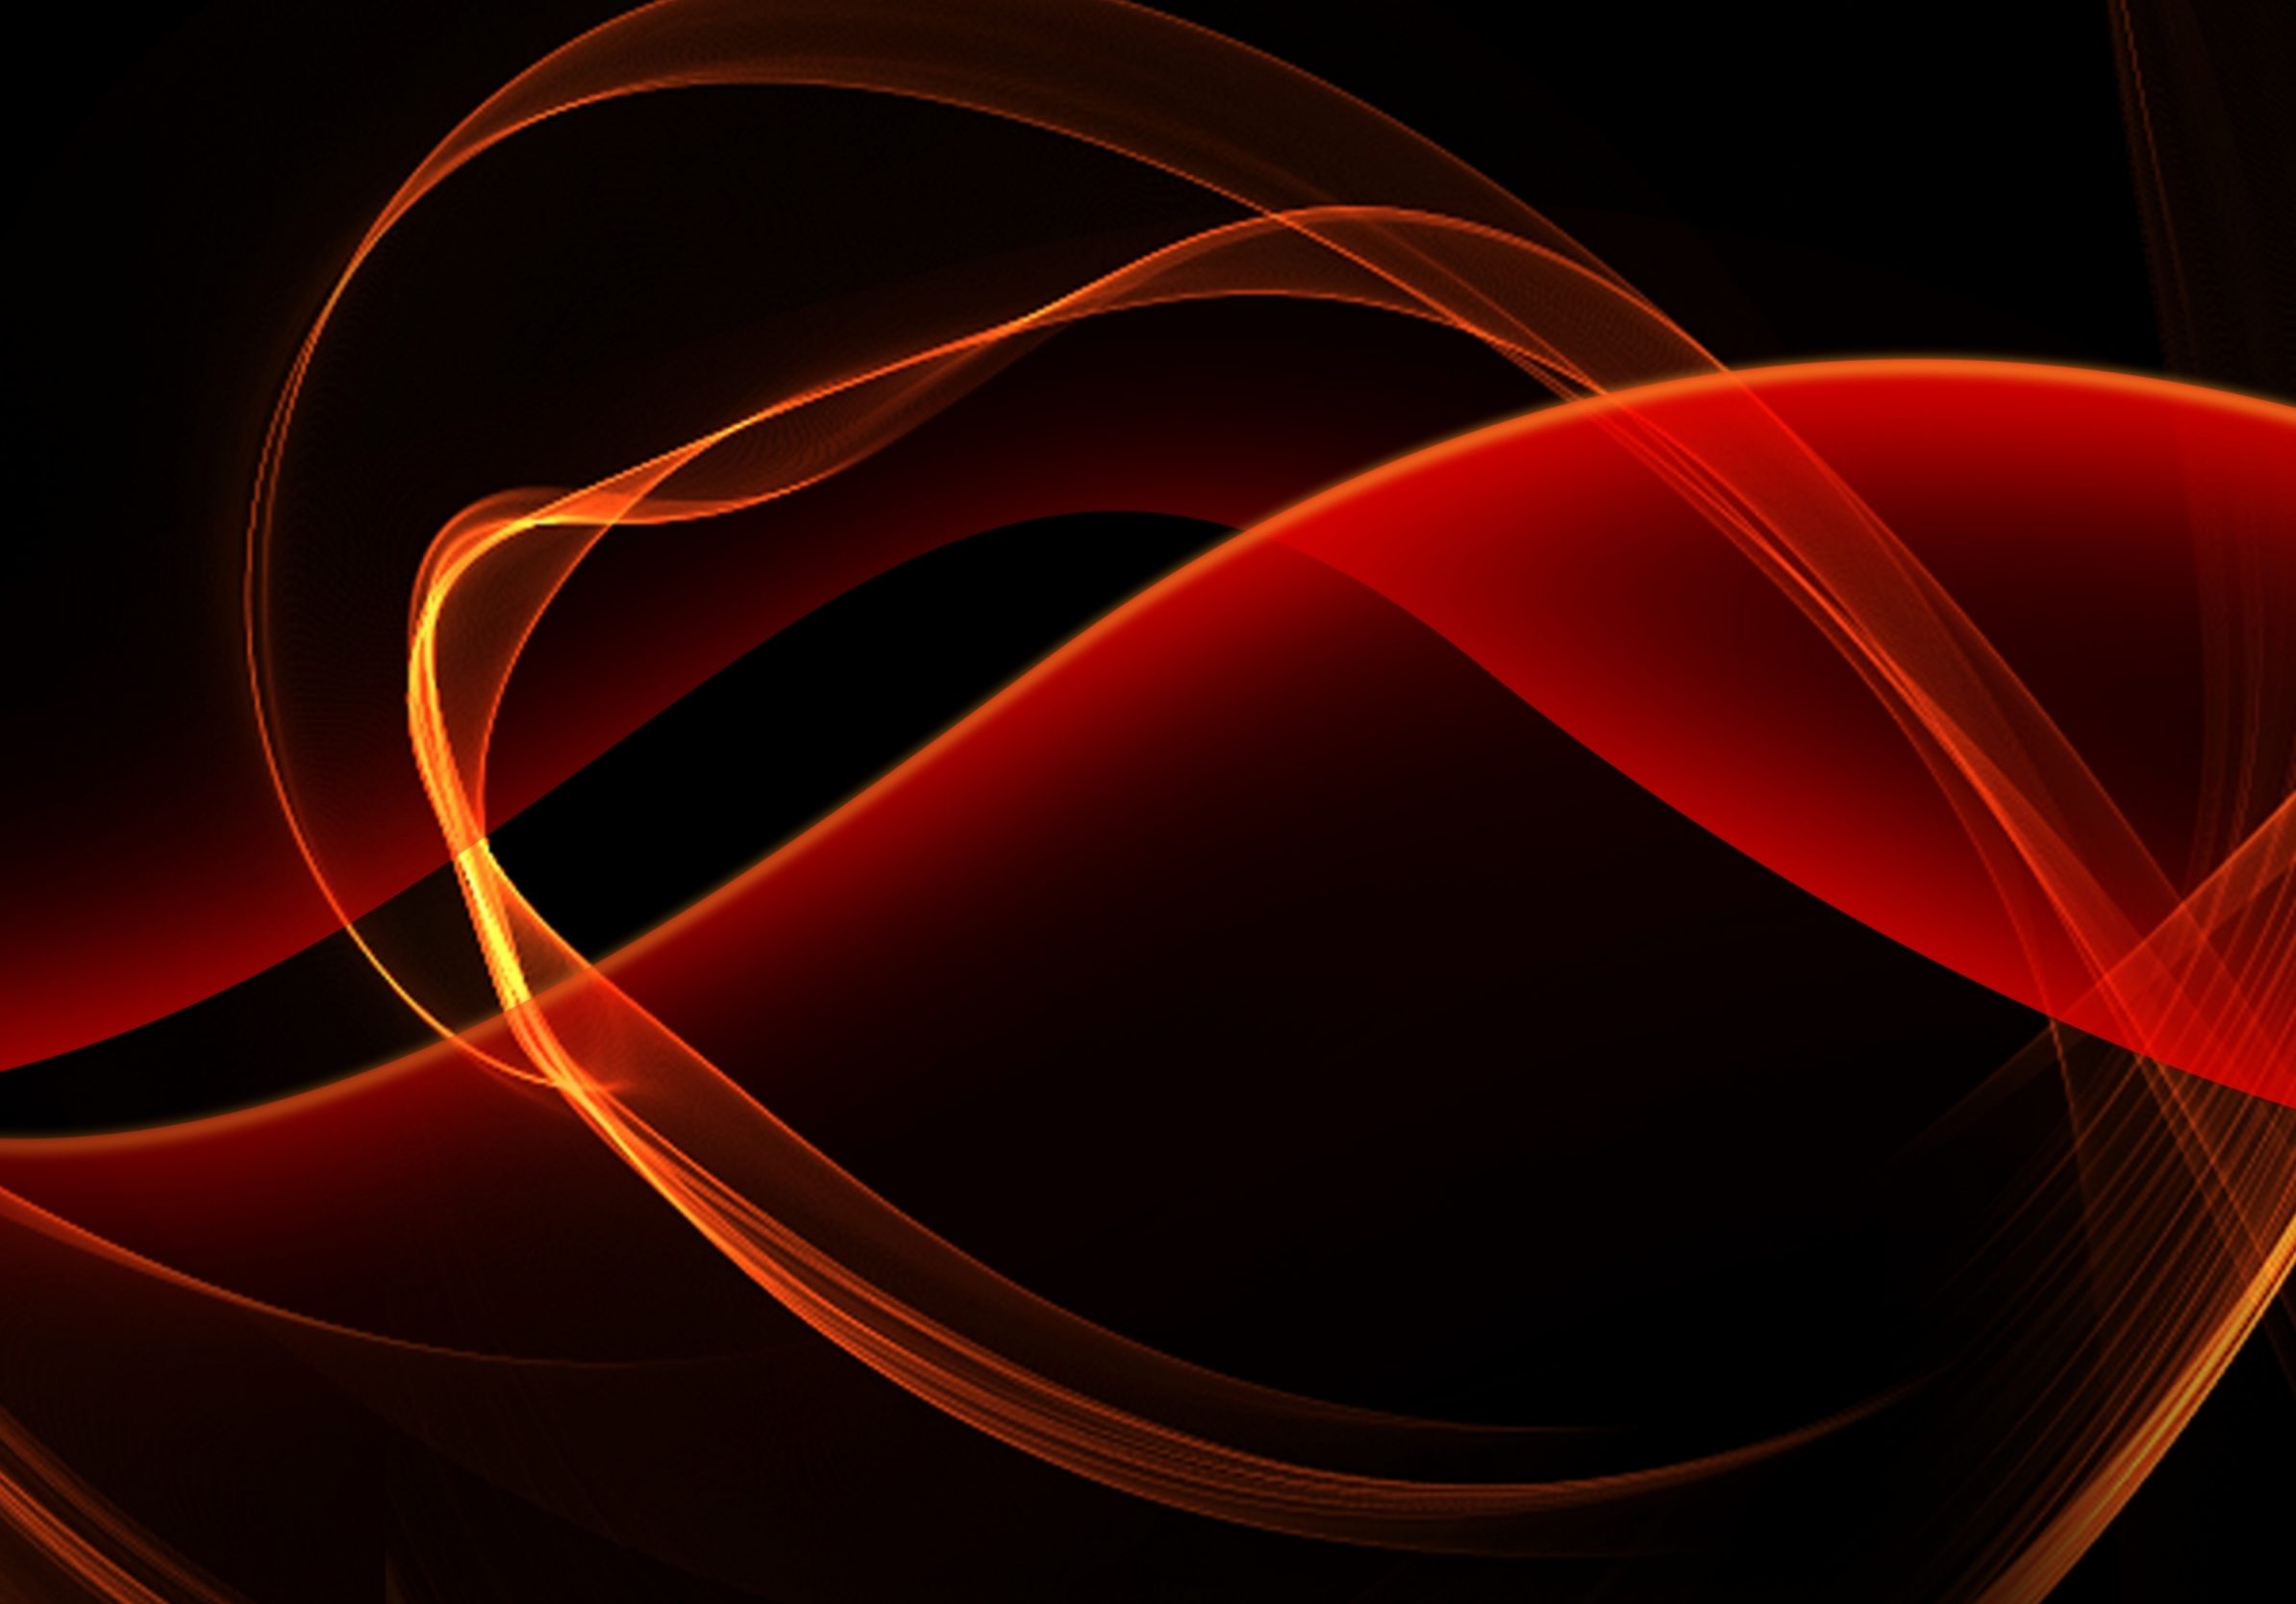 2388x1668 iPad Pro wallpapers Black and Red Glowing Curves iPad Wallpaper 2388x1668 pixels resolution